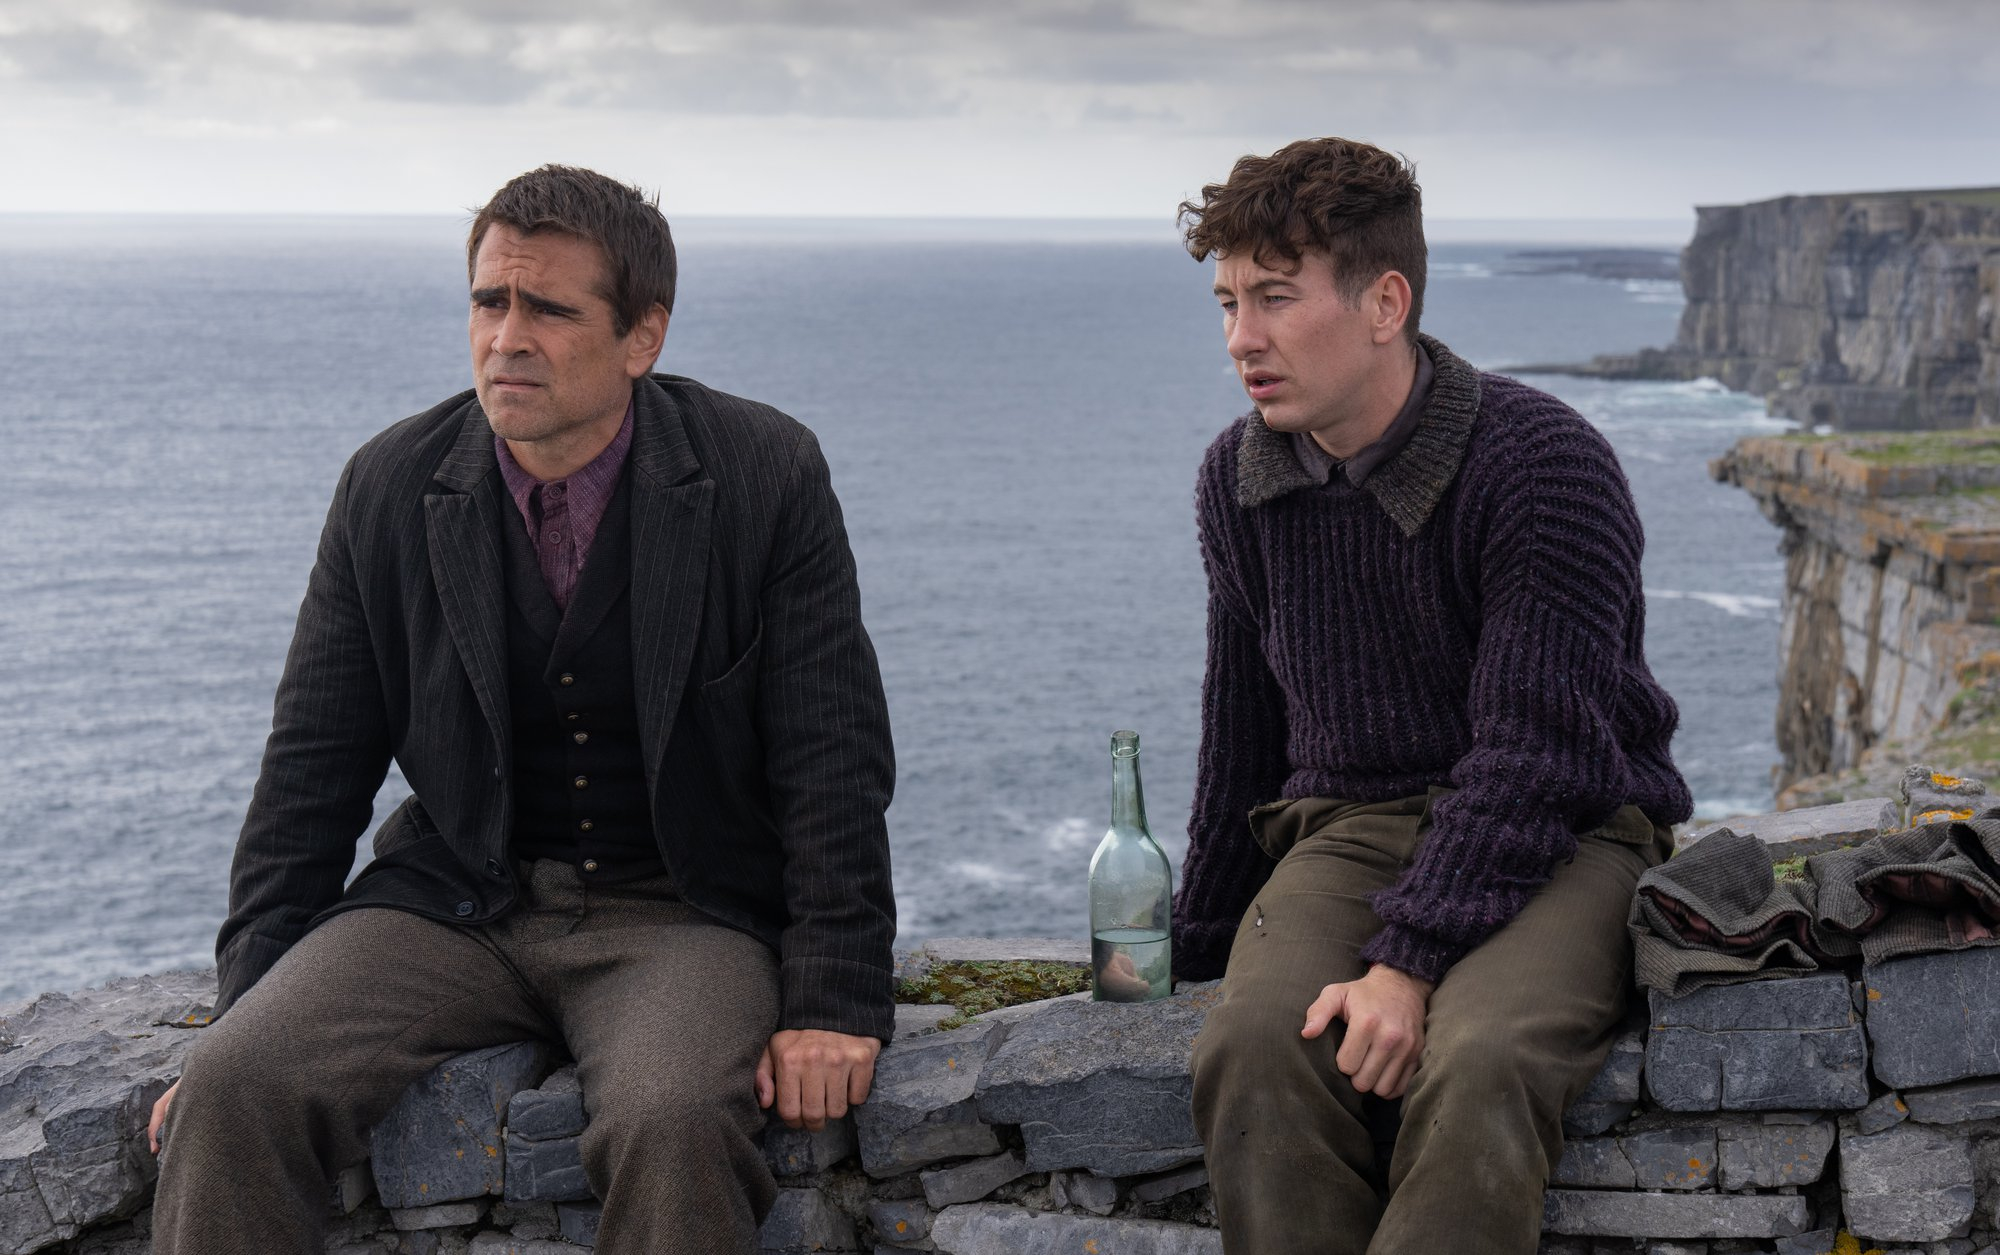 'The Banshees of Inisherin' Colin Farrell as Pádraic Súilleabháin and Barry Keoghan as Dominic Kearney sitting on a stone wall with a bottle of liquor between them